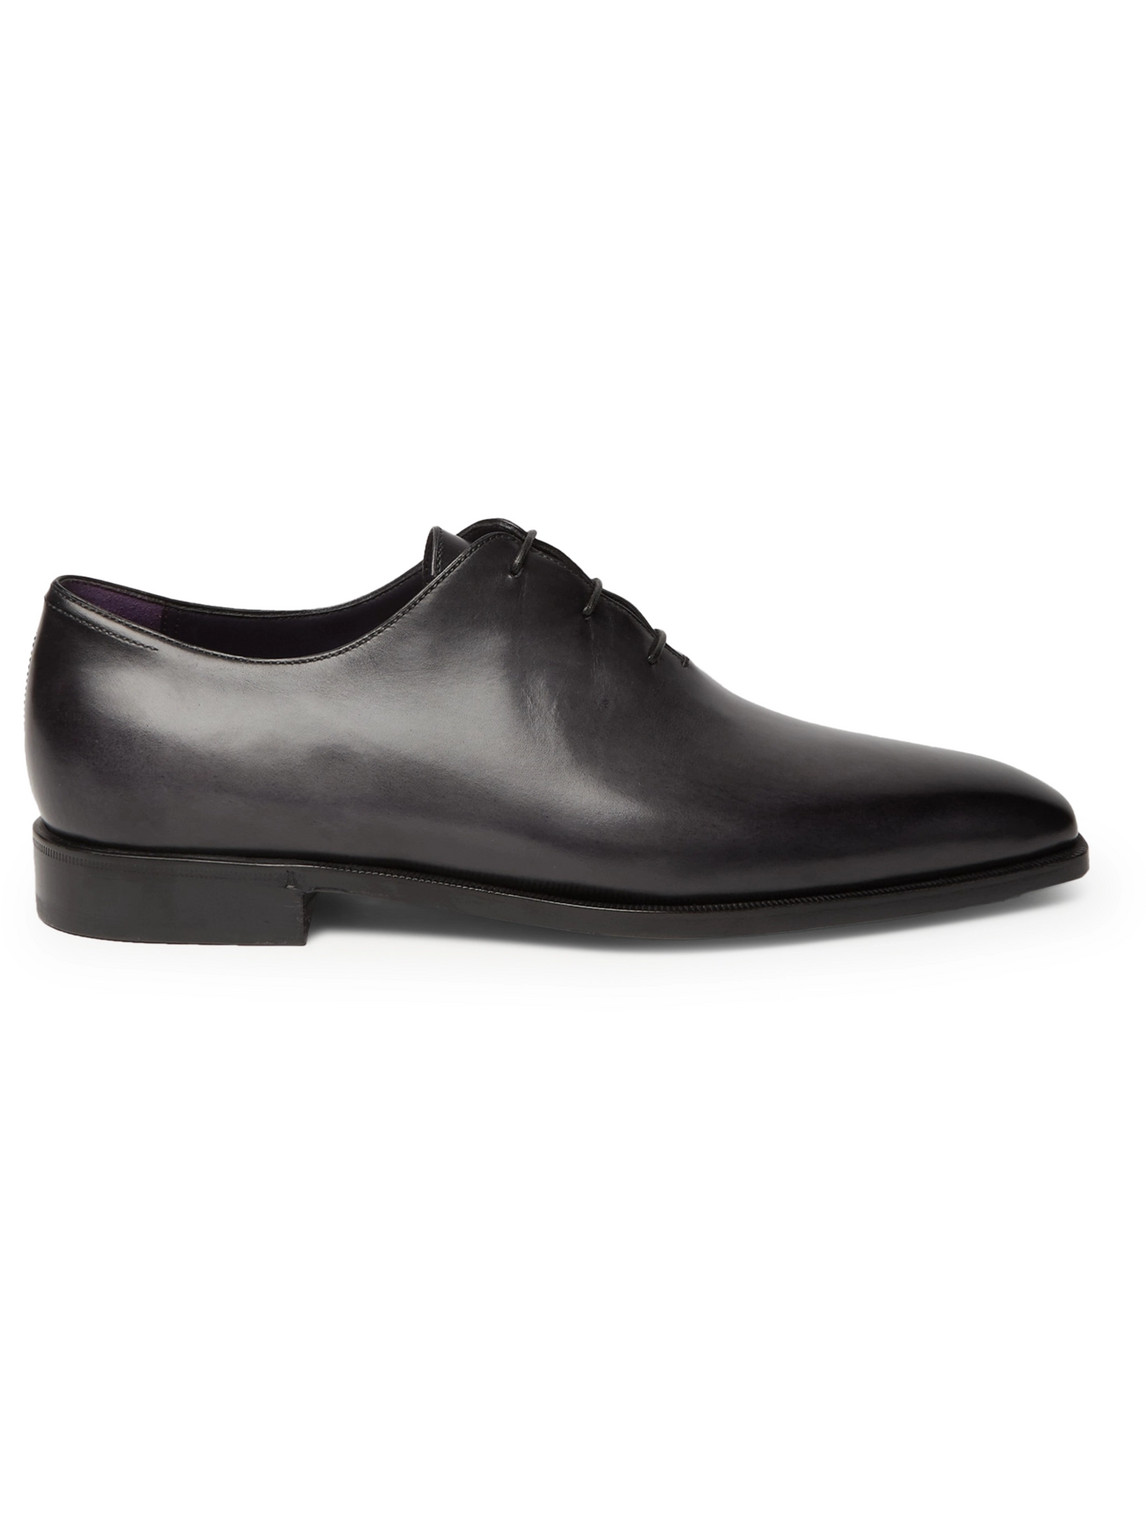 BERLUTI LEATHER OXFORD SHOES